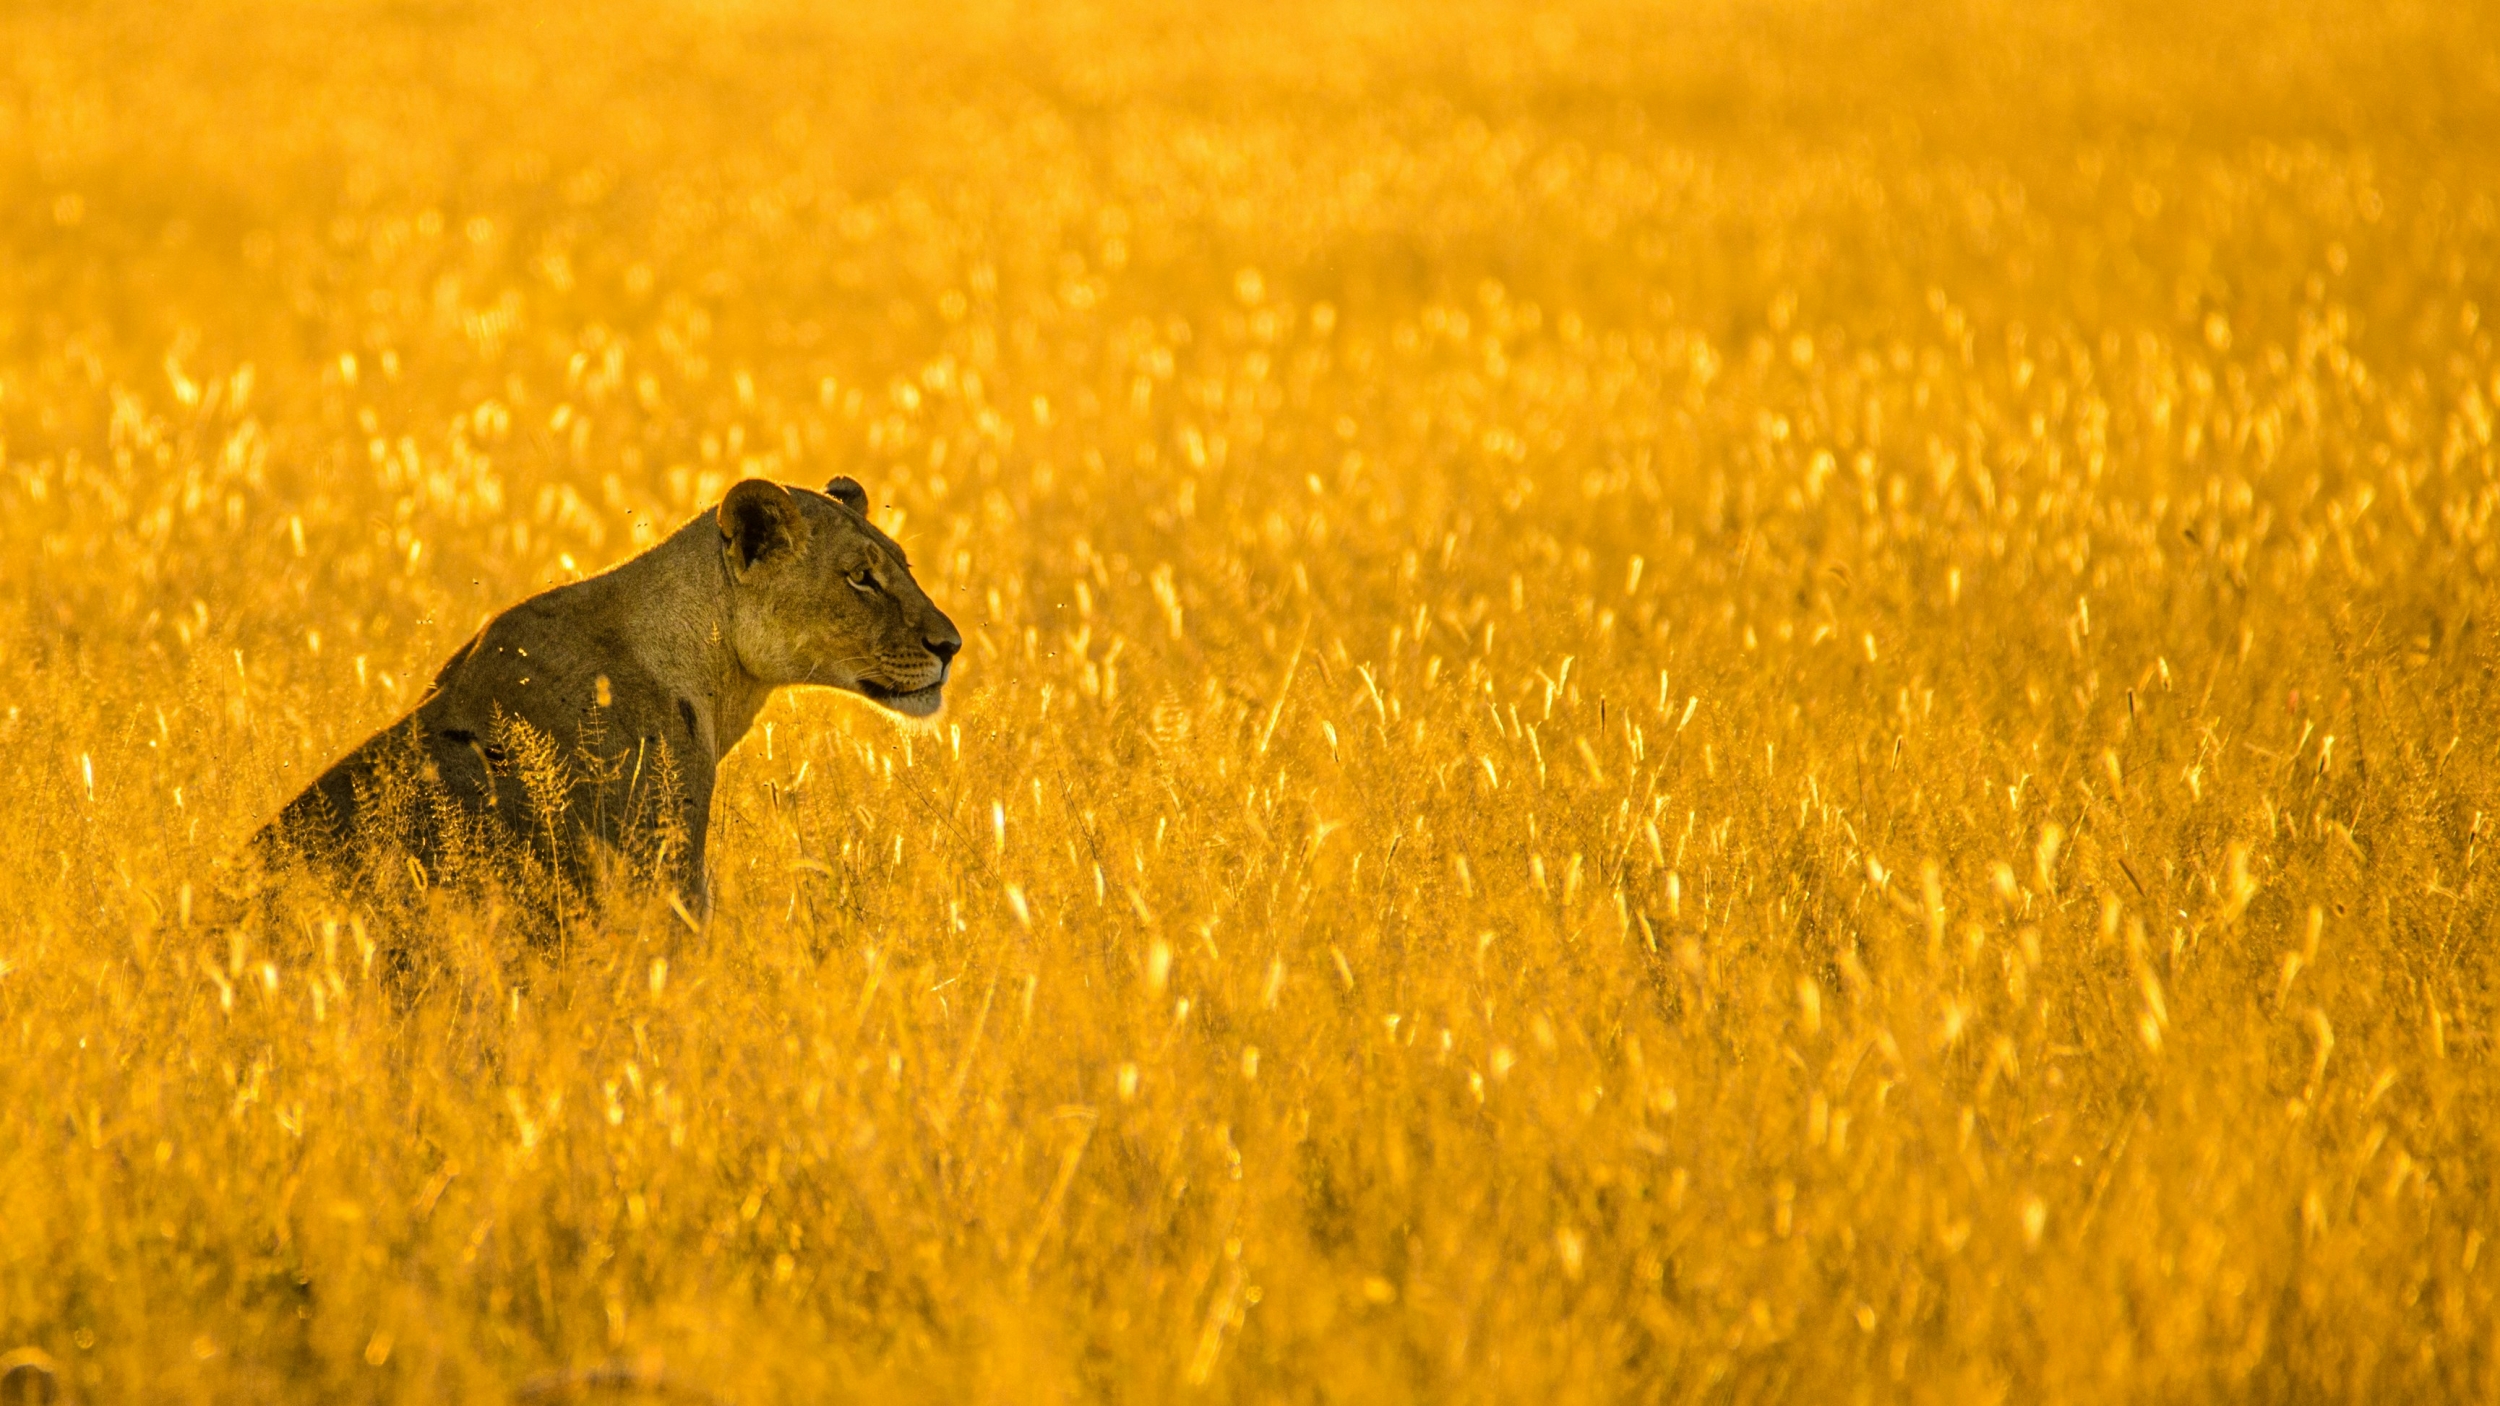 Lioness sitting in a golden field